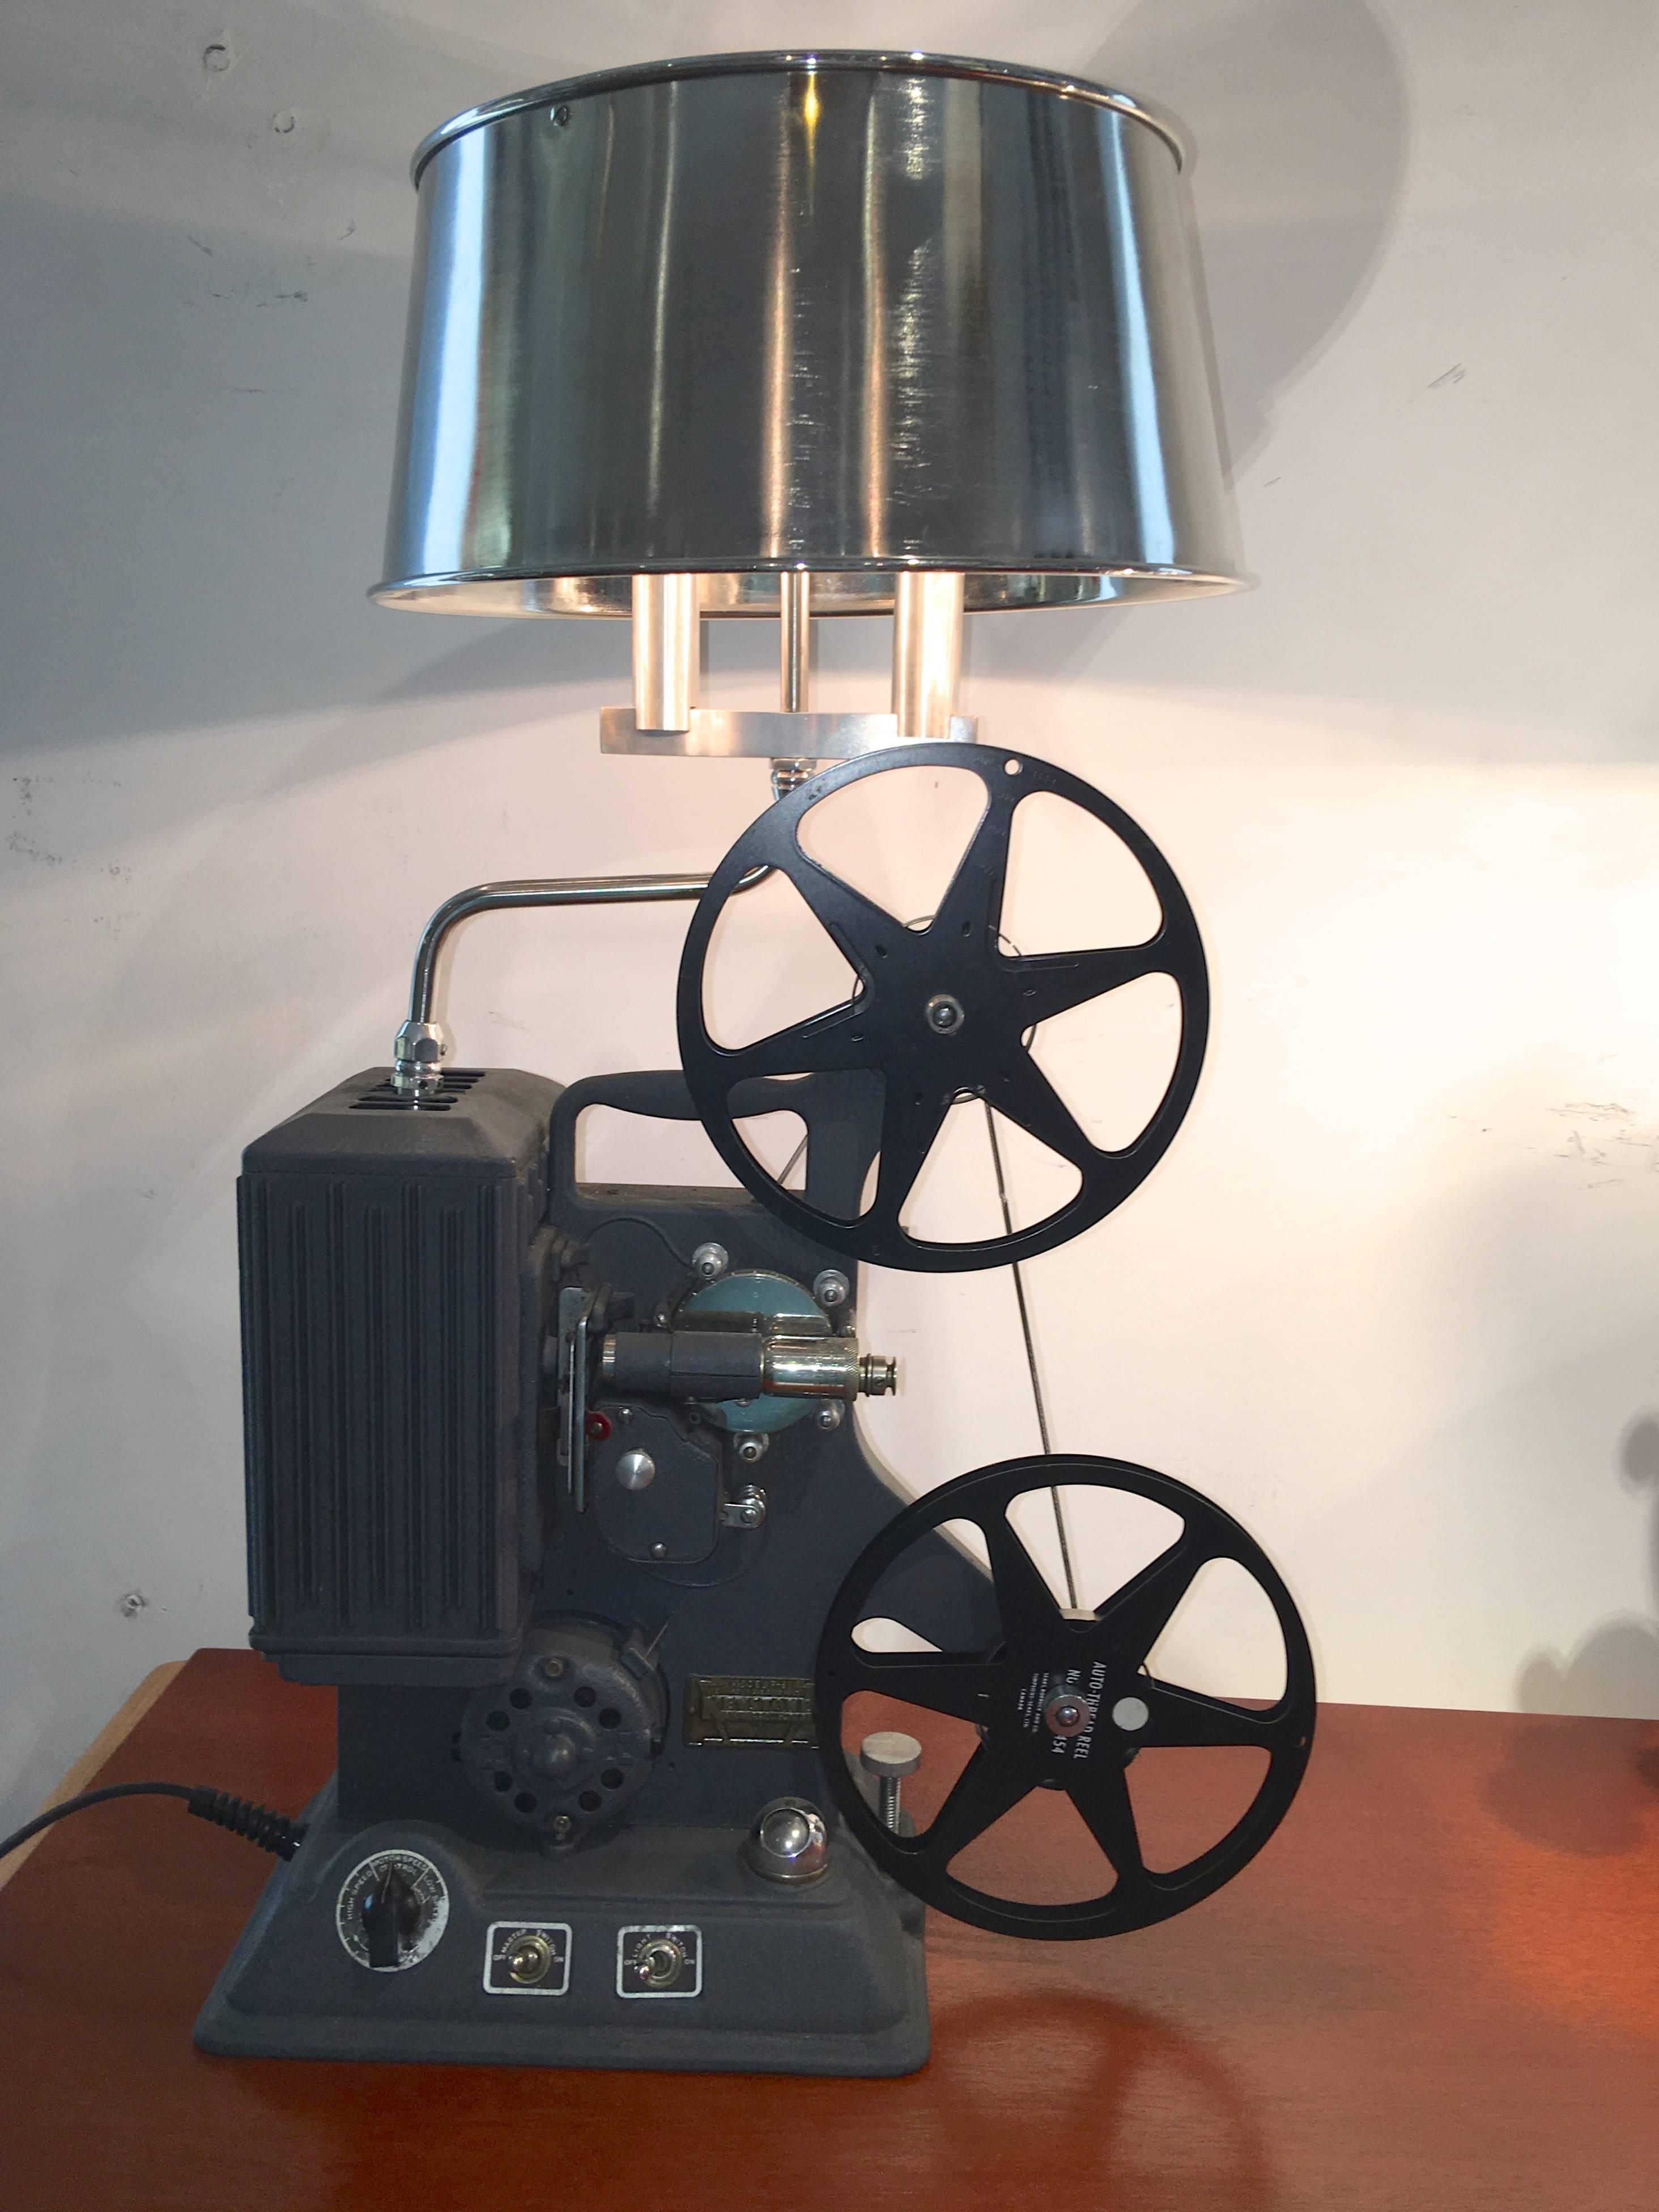 Fully operational 1939 Model R-8 8mm film projector by Keystone Manufacturing Company of Boston, MA which has been converted into a table lamp with machined and polished aluminum hardware and lamp works and a polished stainless steel lampshade.